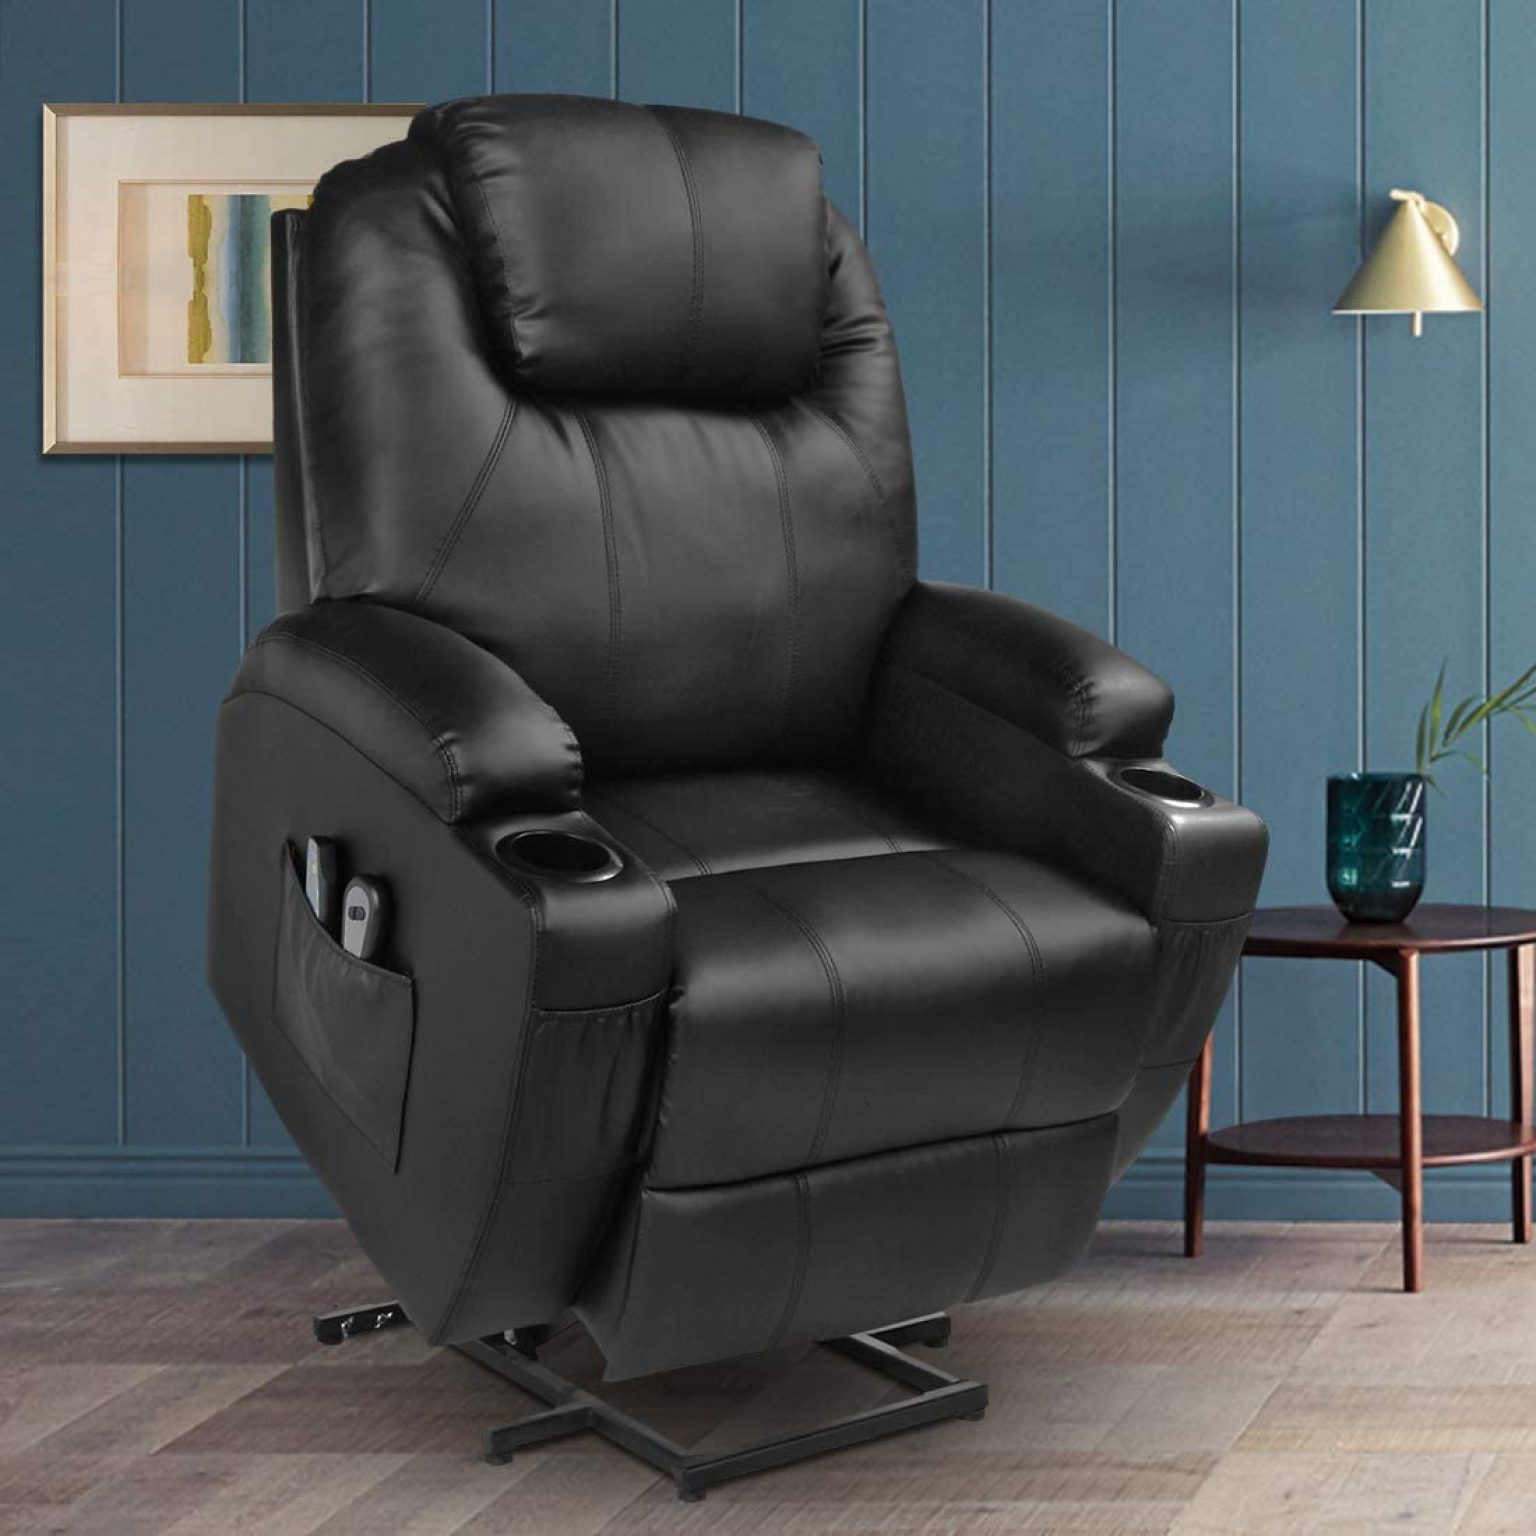 Recliner Chair with Lift Relaxing Gifts for Men